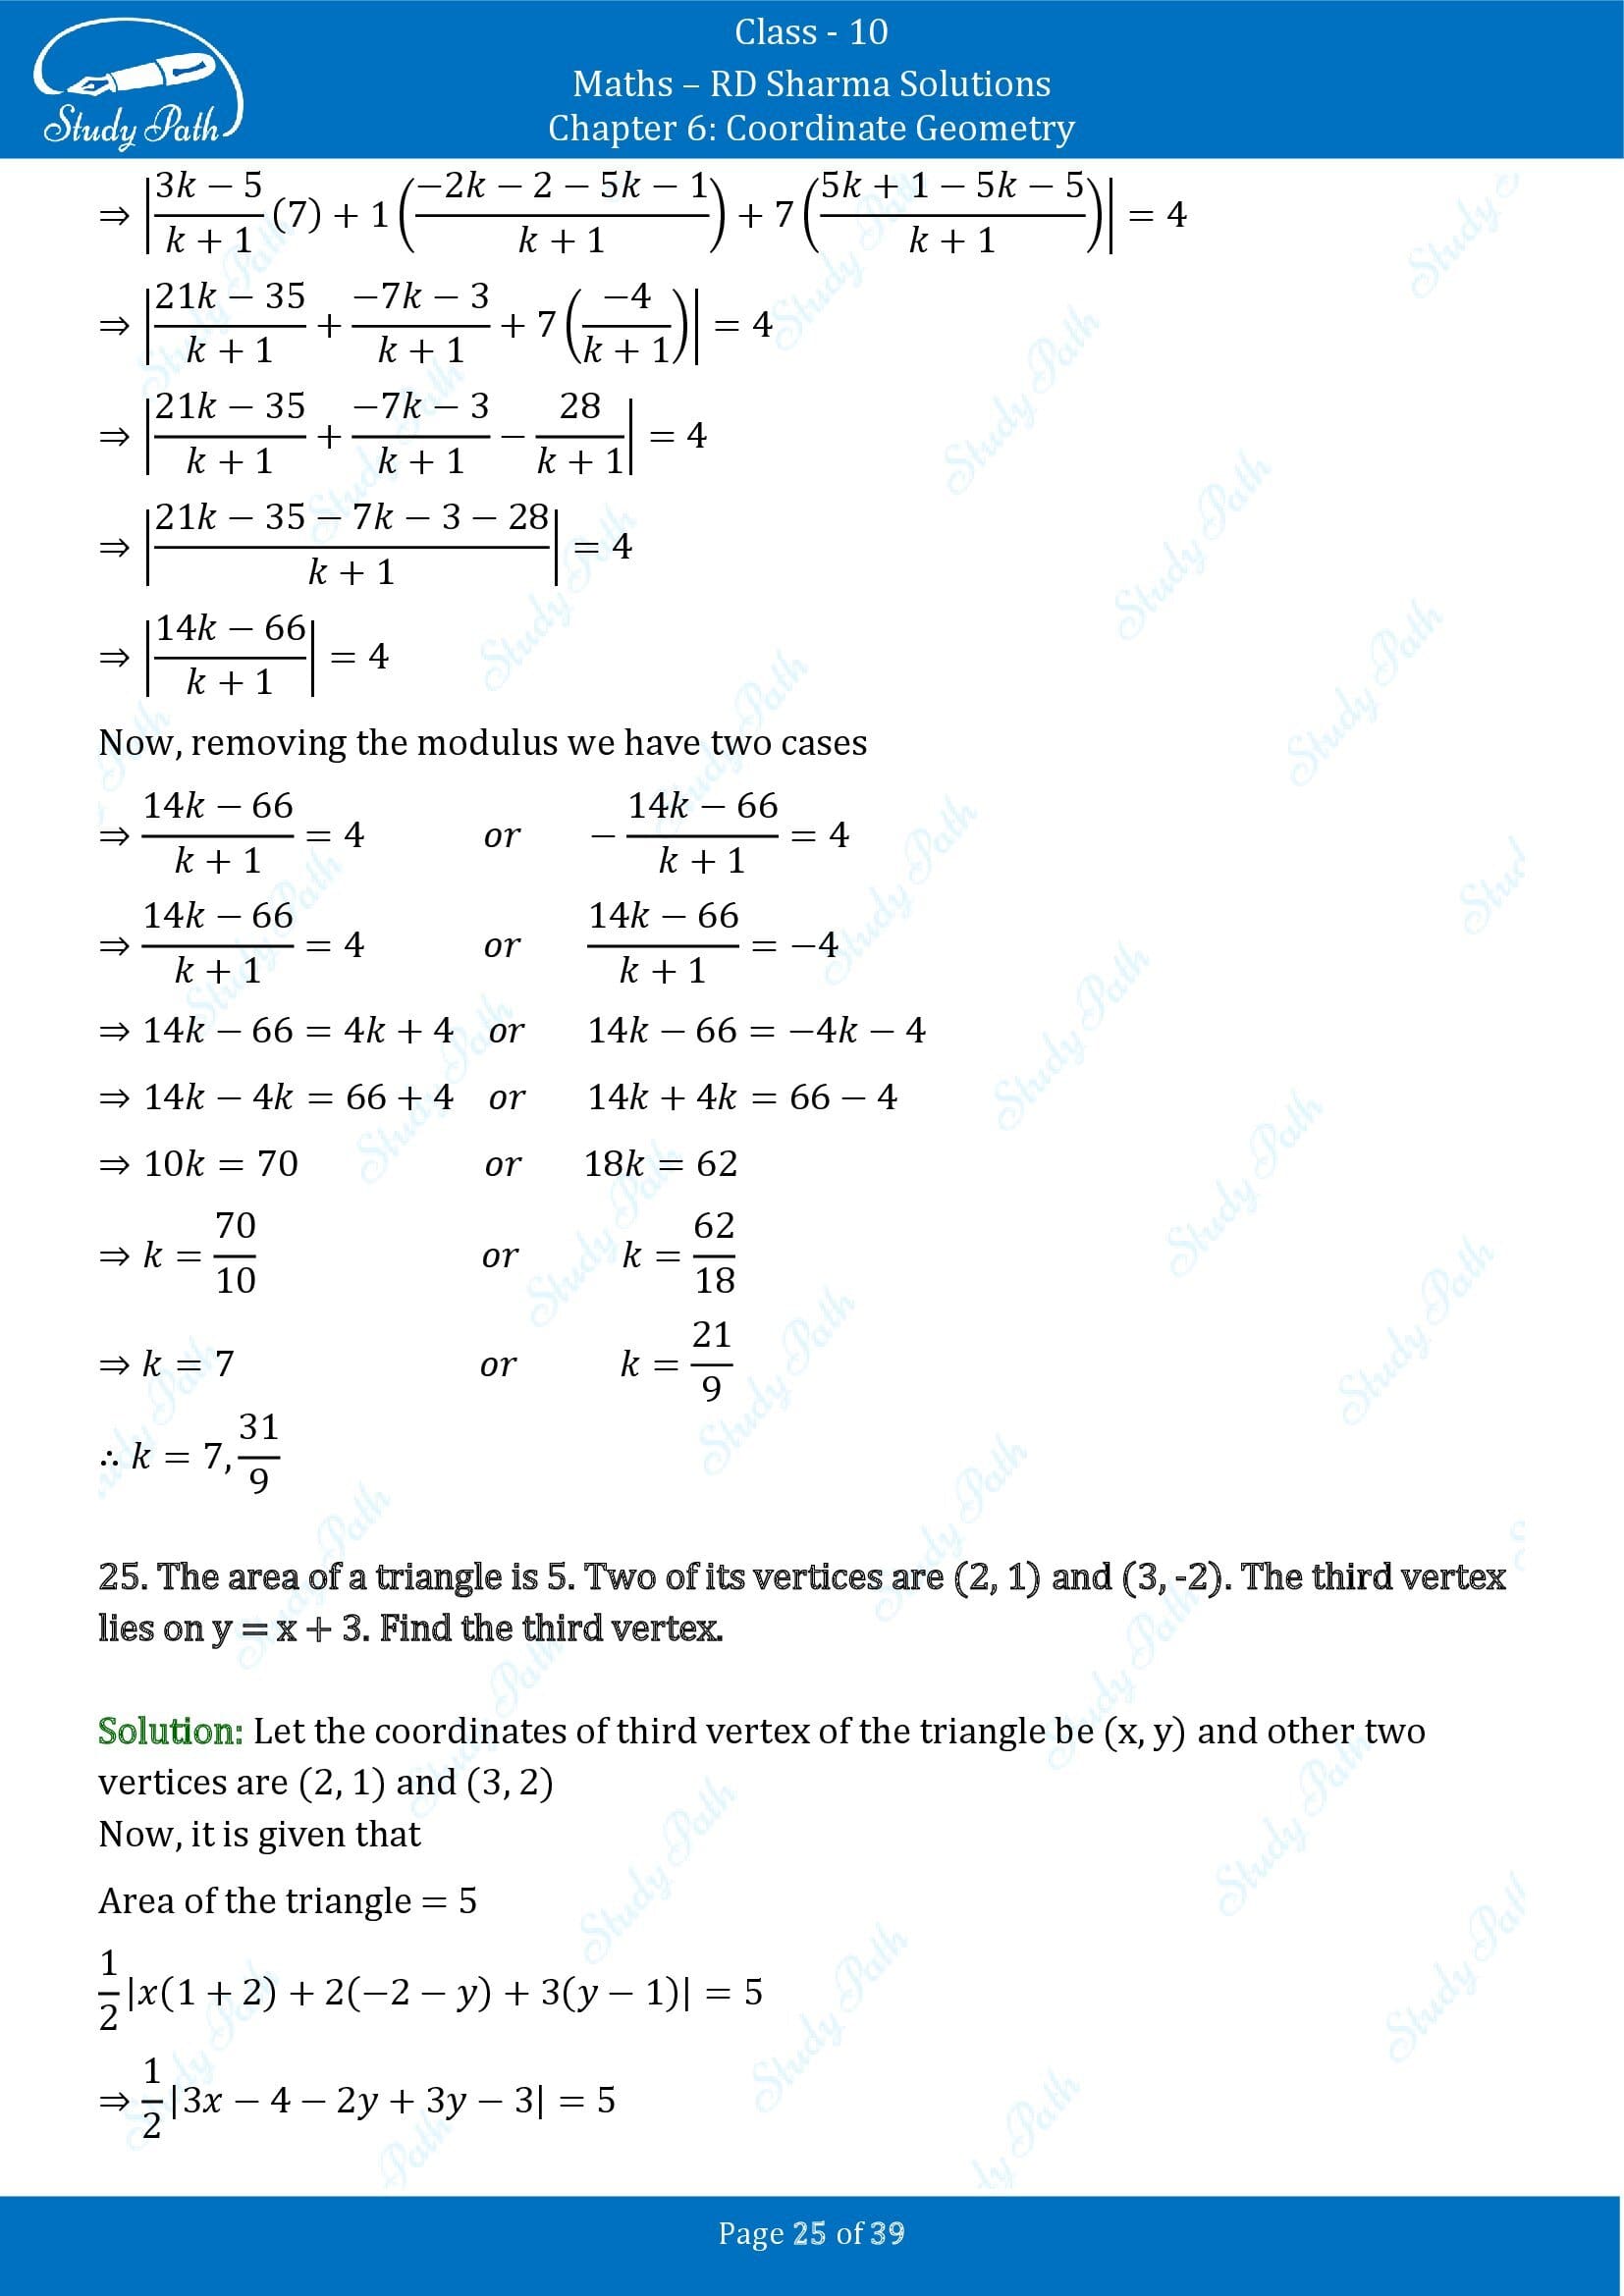 RD Sharma Solutions Class 10 Chapter 6 Coordinate Geometry Exercise 6.5 0025